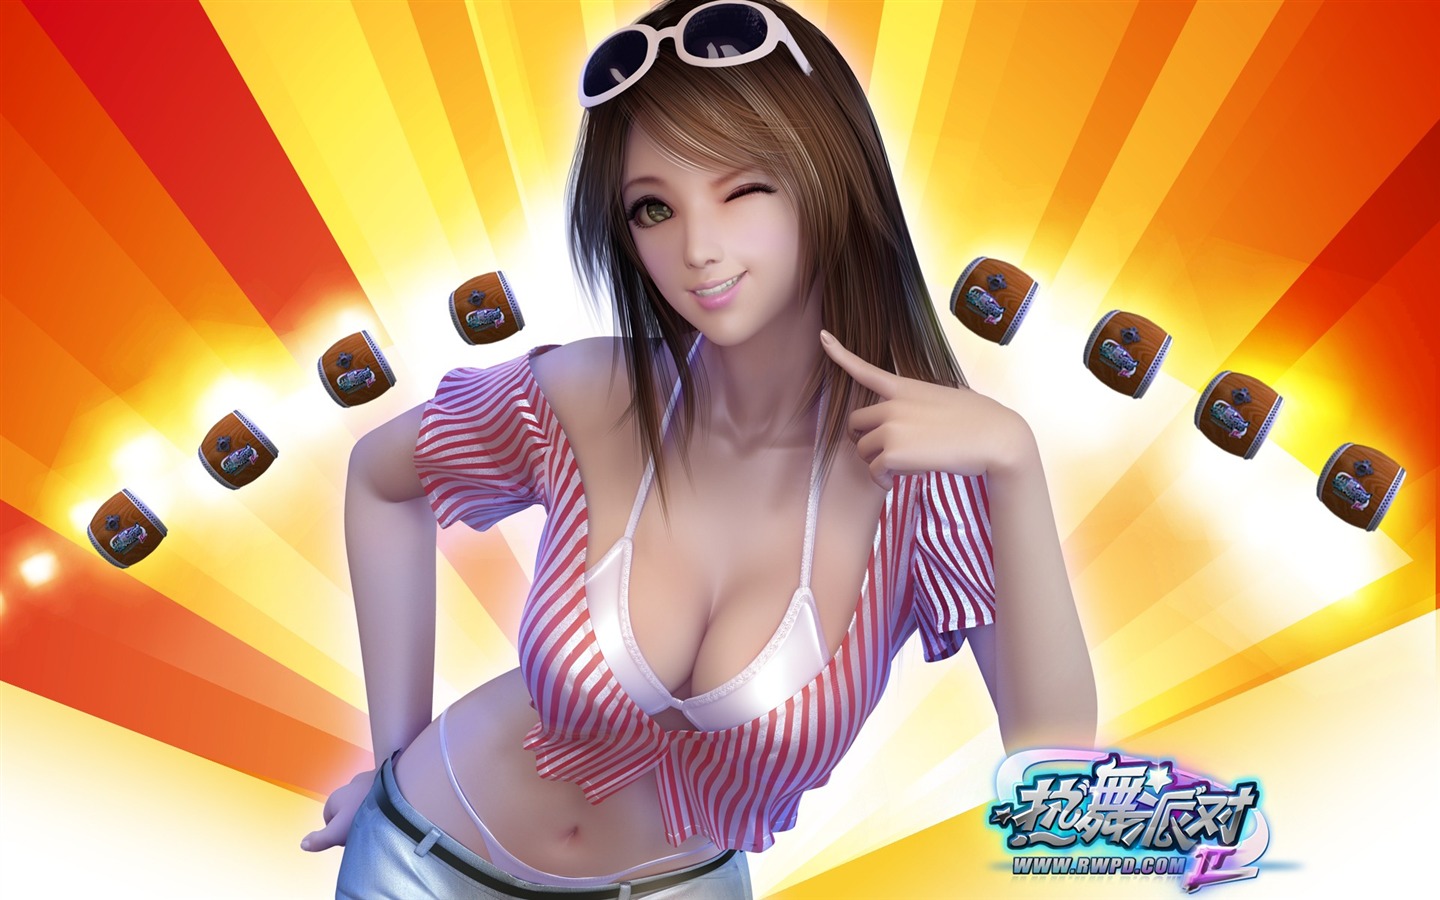 Online game Hot Dance Party II official wallpapers #19 - 1440x900